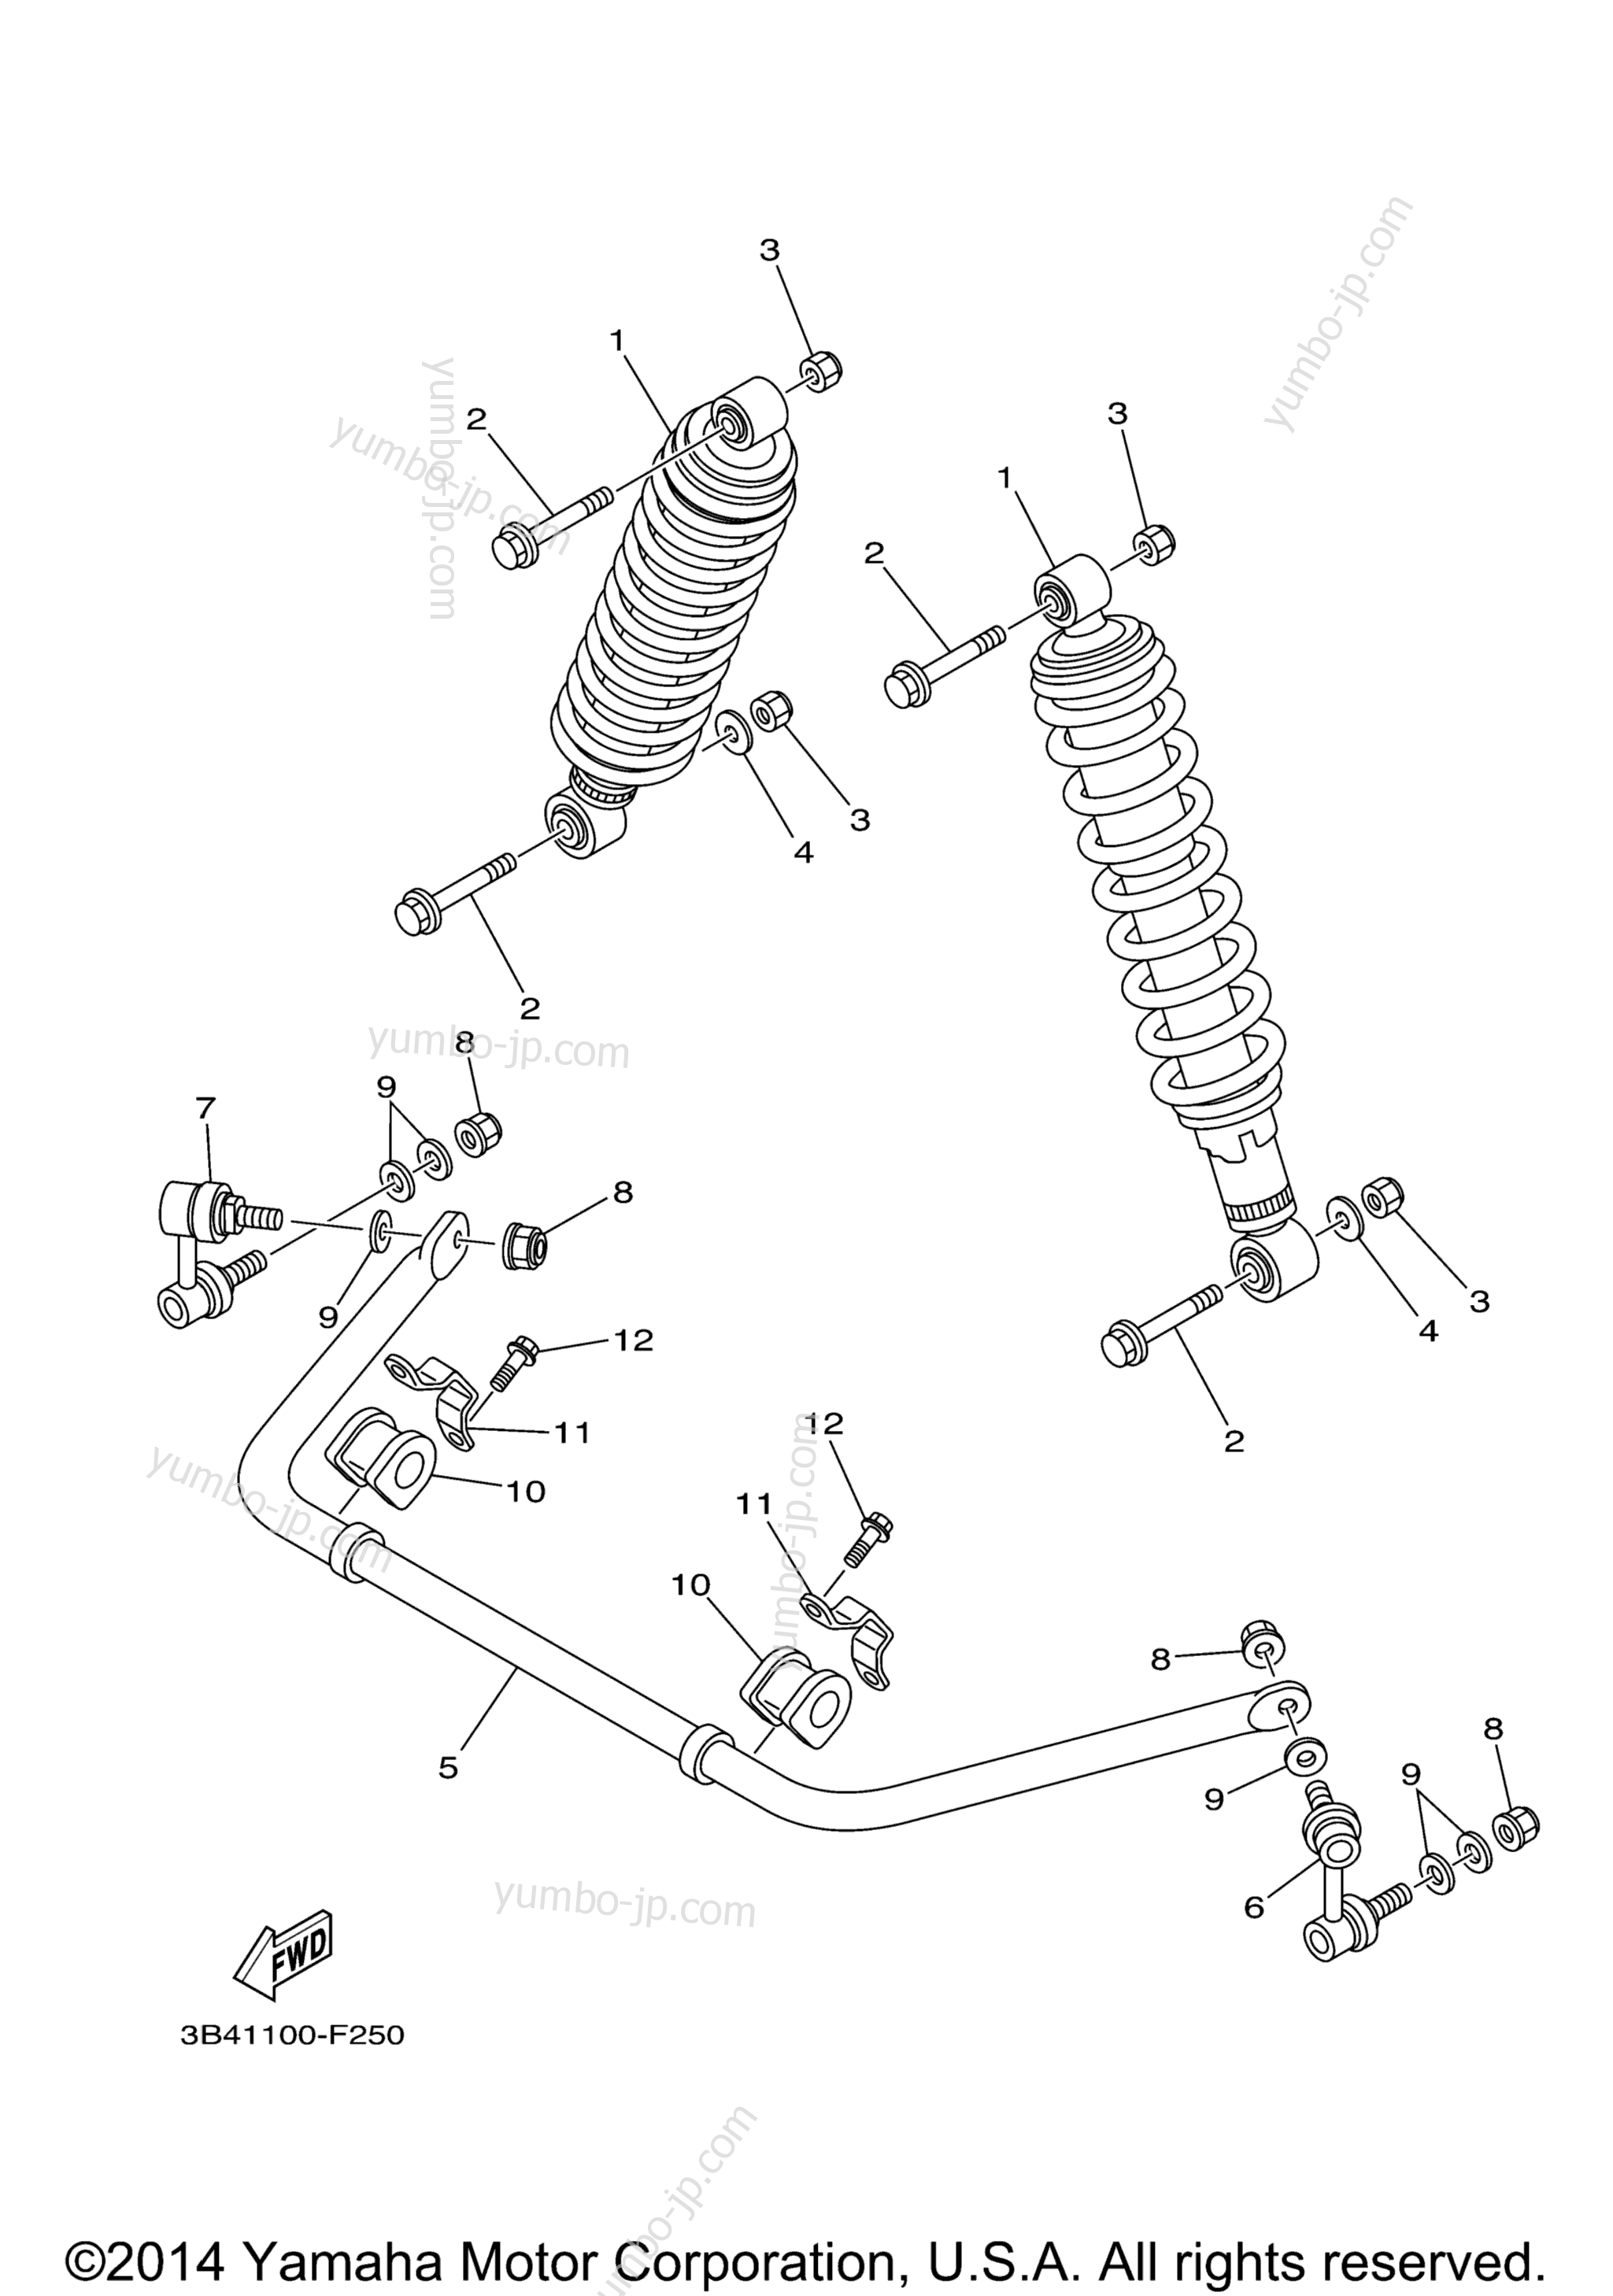 Rear Suspension for ATVs YAMAHA GRIZZLY FI 700 HUNTER (YFM7FGHX) 2008 year